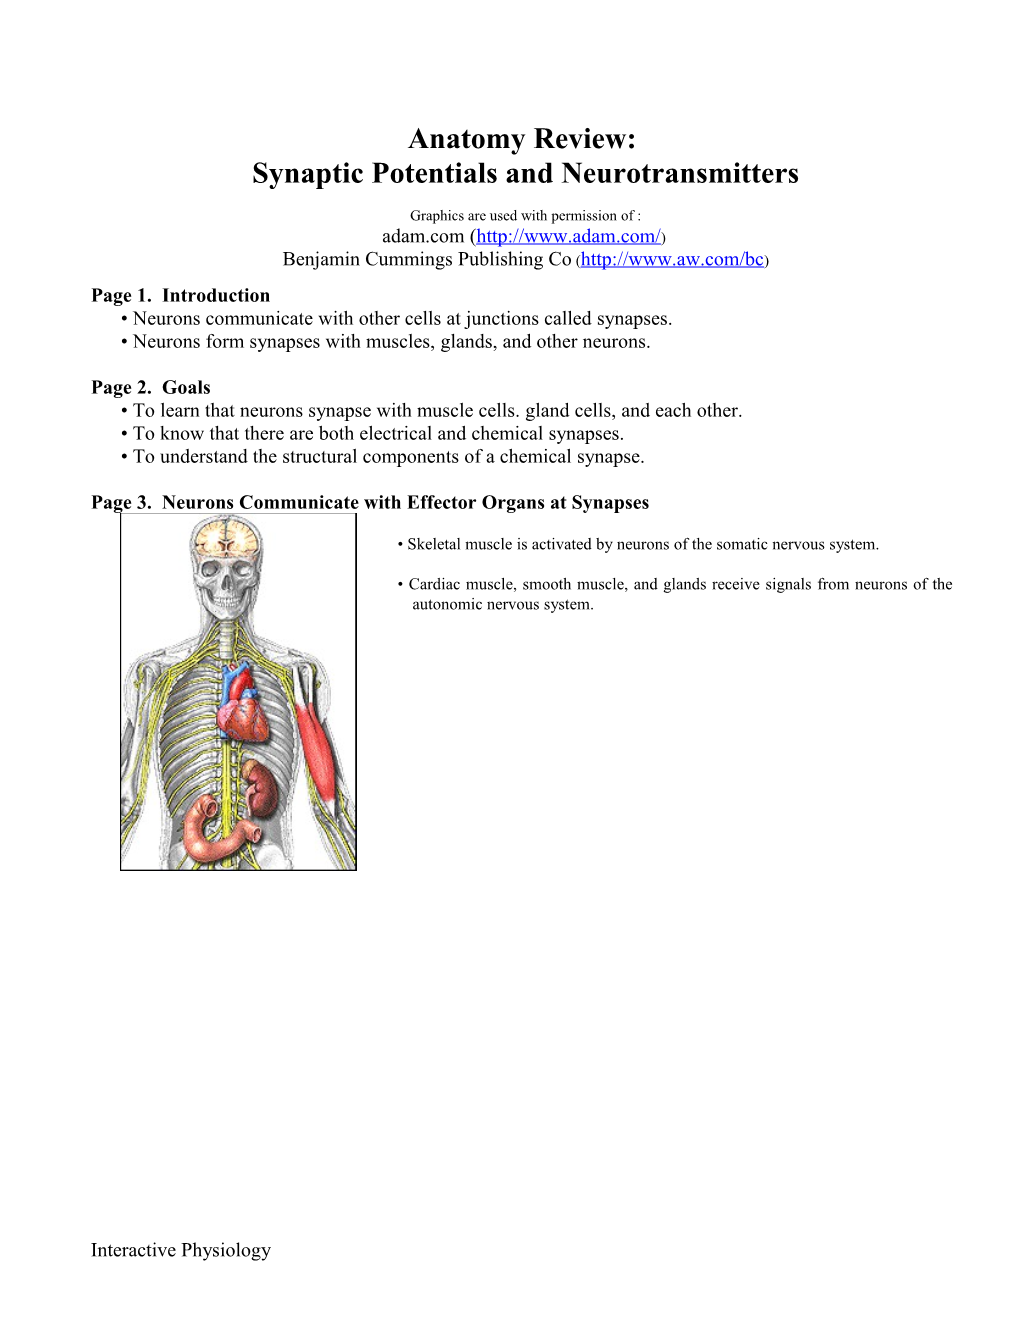 Synaptic Potentials and Neurotransmitters